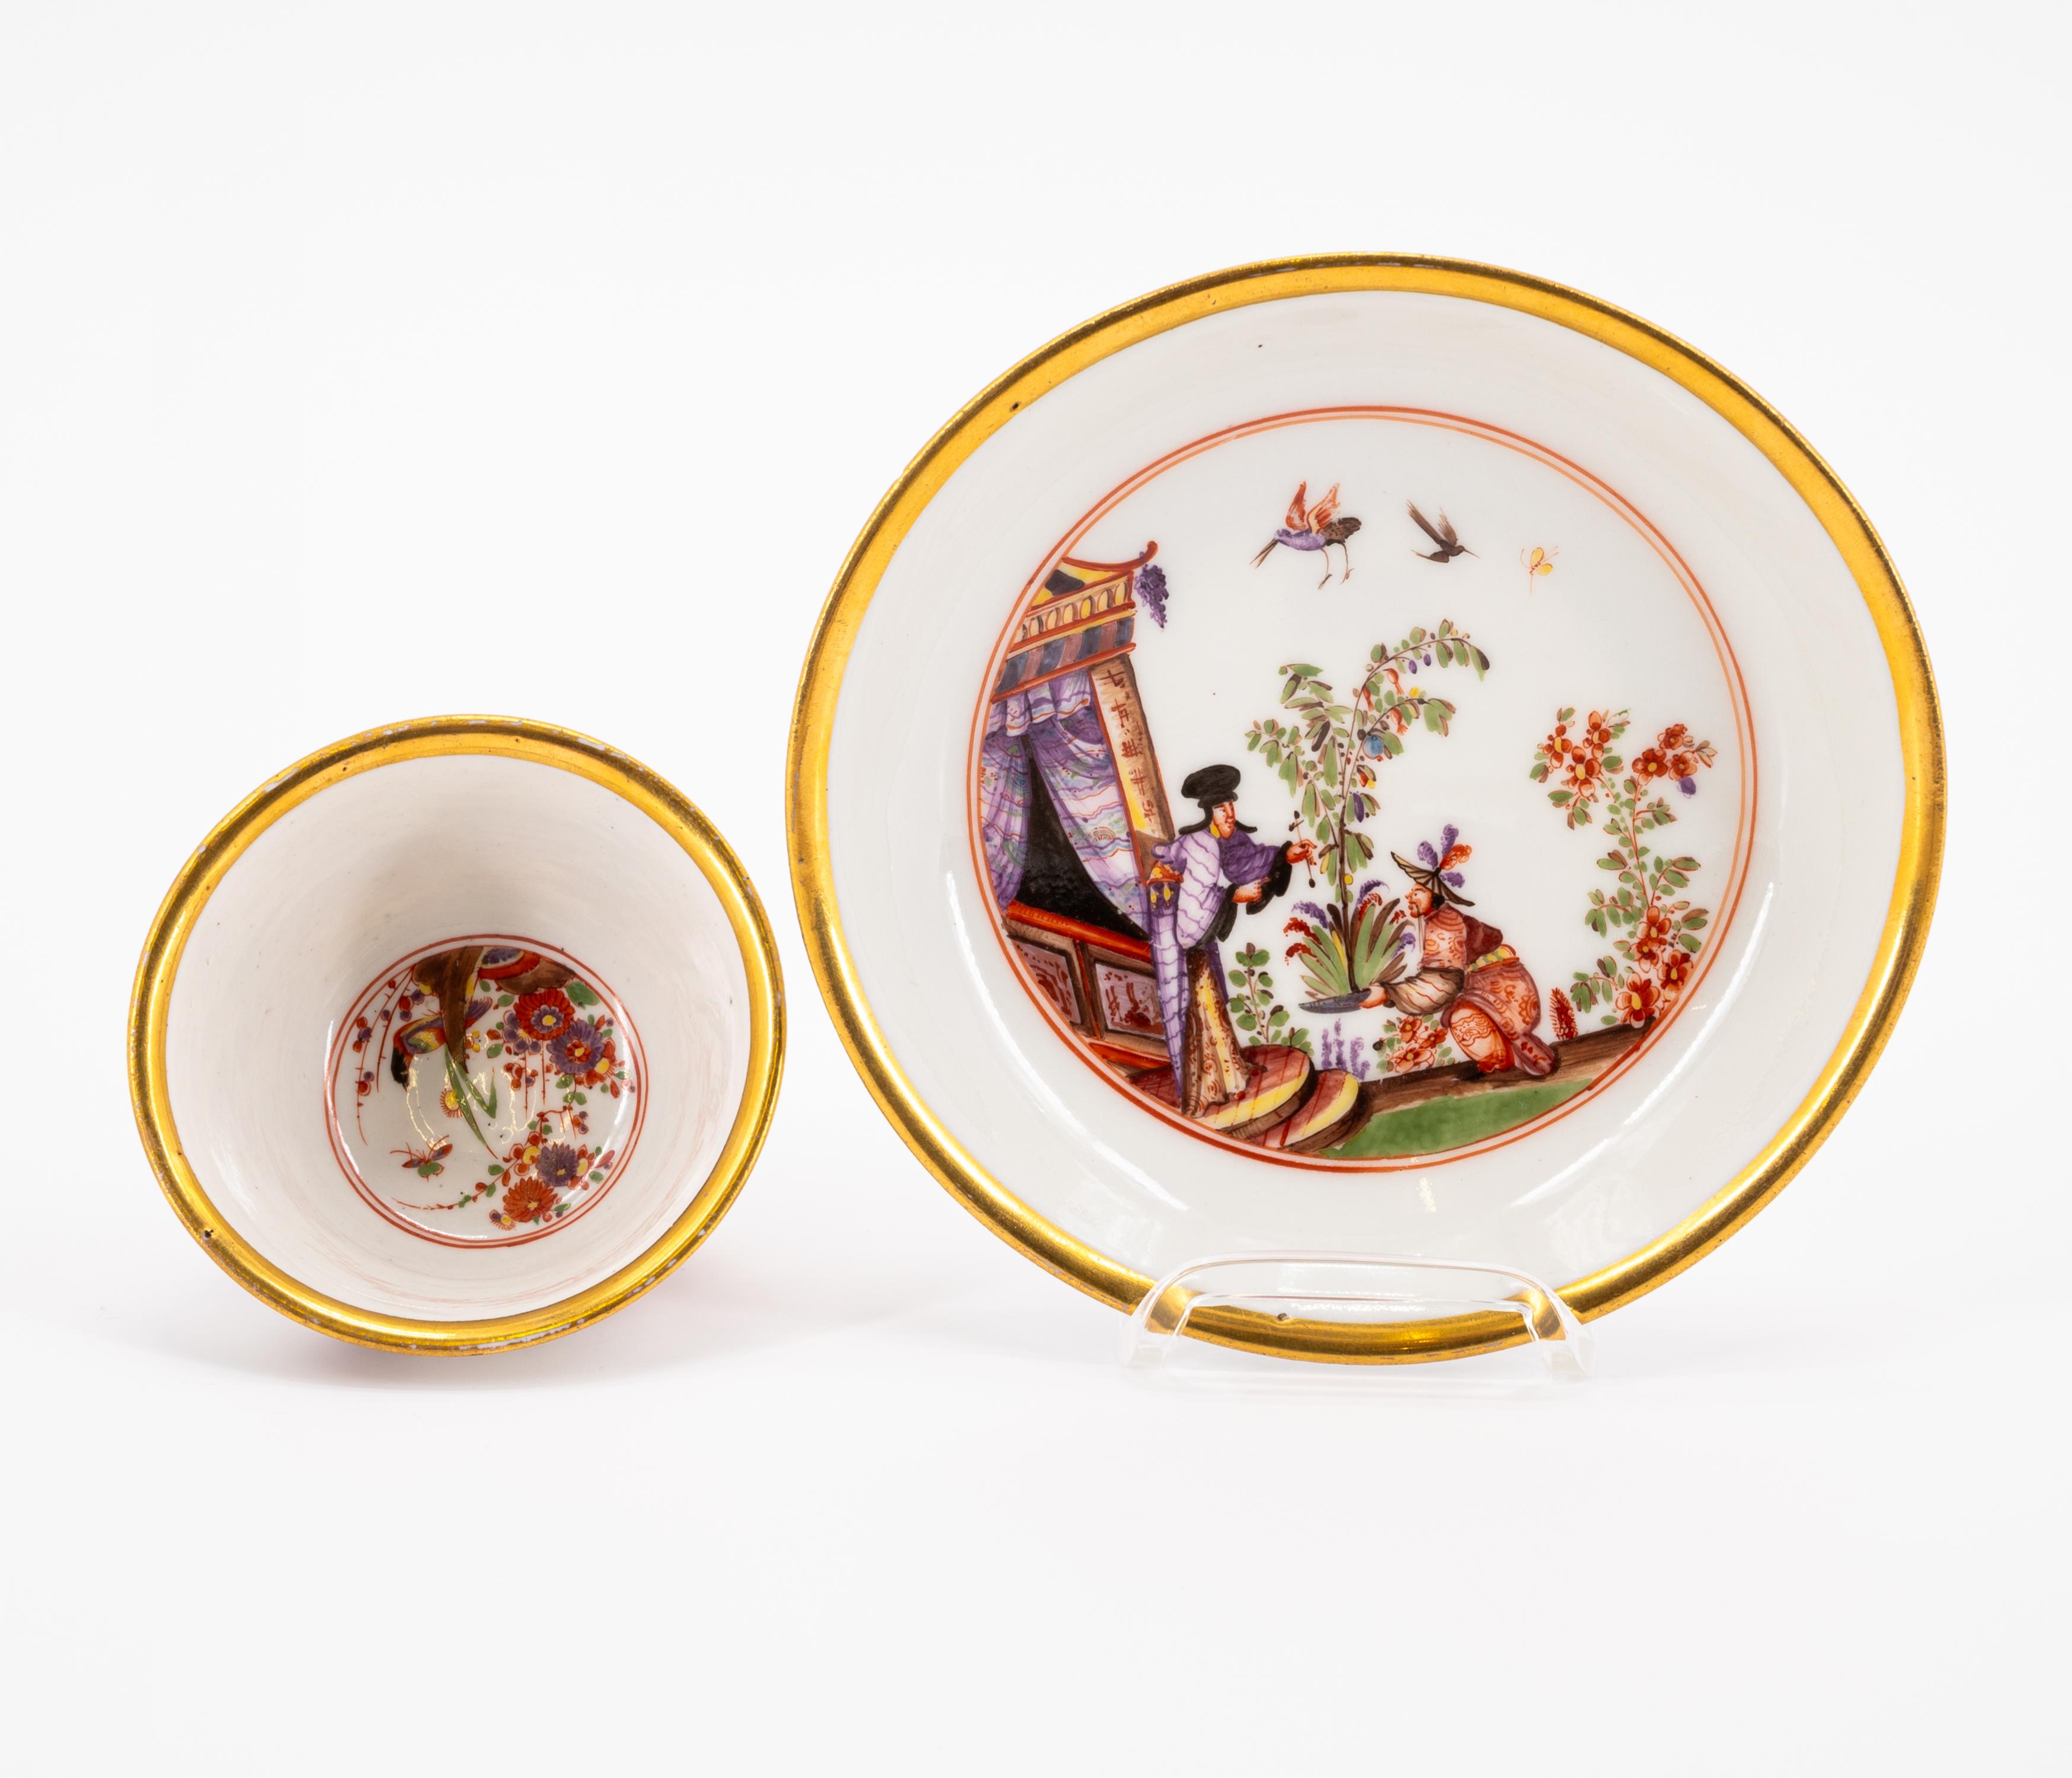 PORCELAIN TEA BOWLS AND SAUCER WITH FINE CHINOISERIES - Image 5 of 7